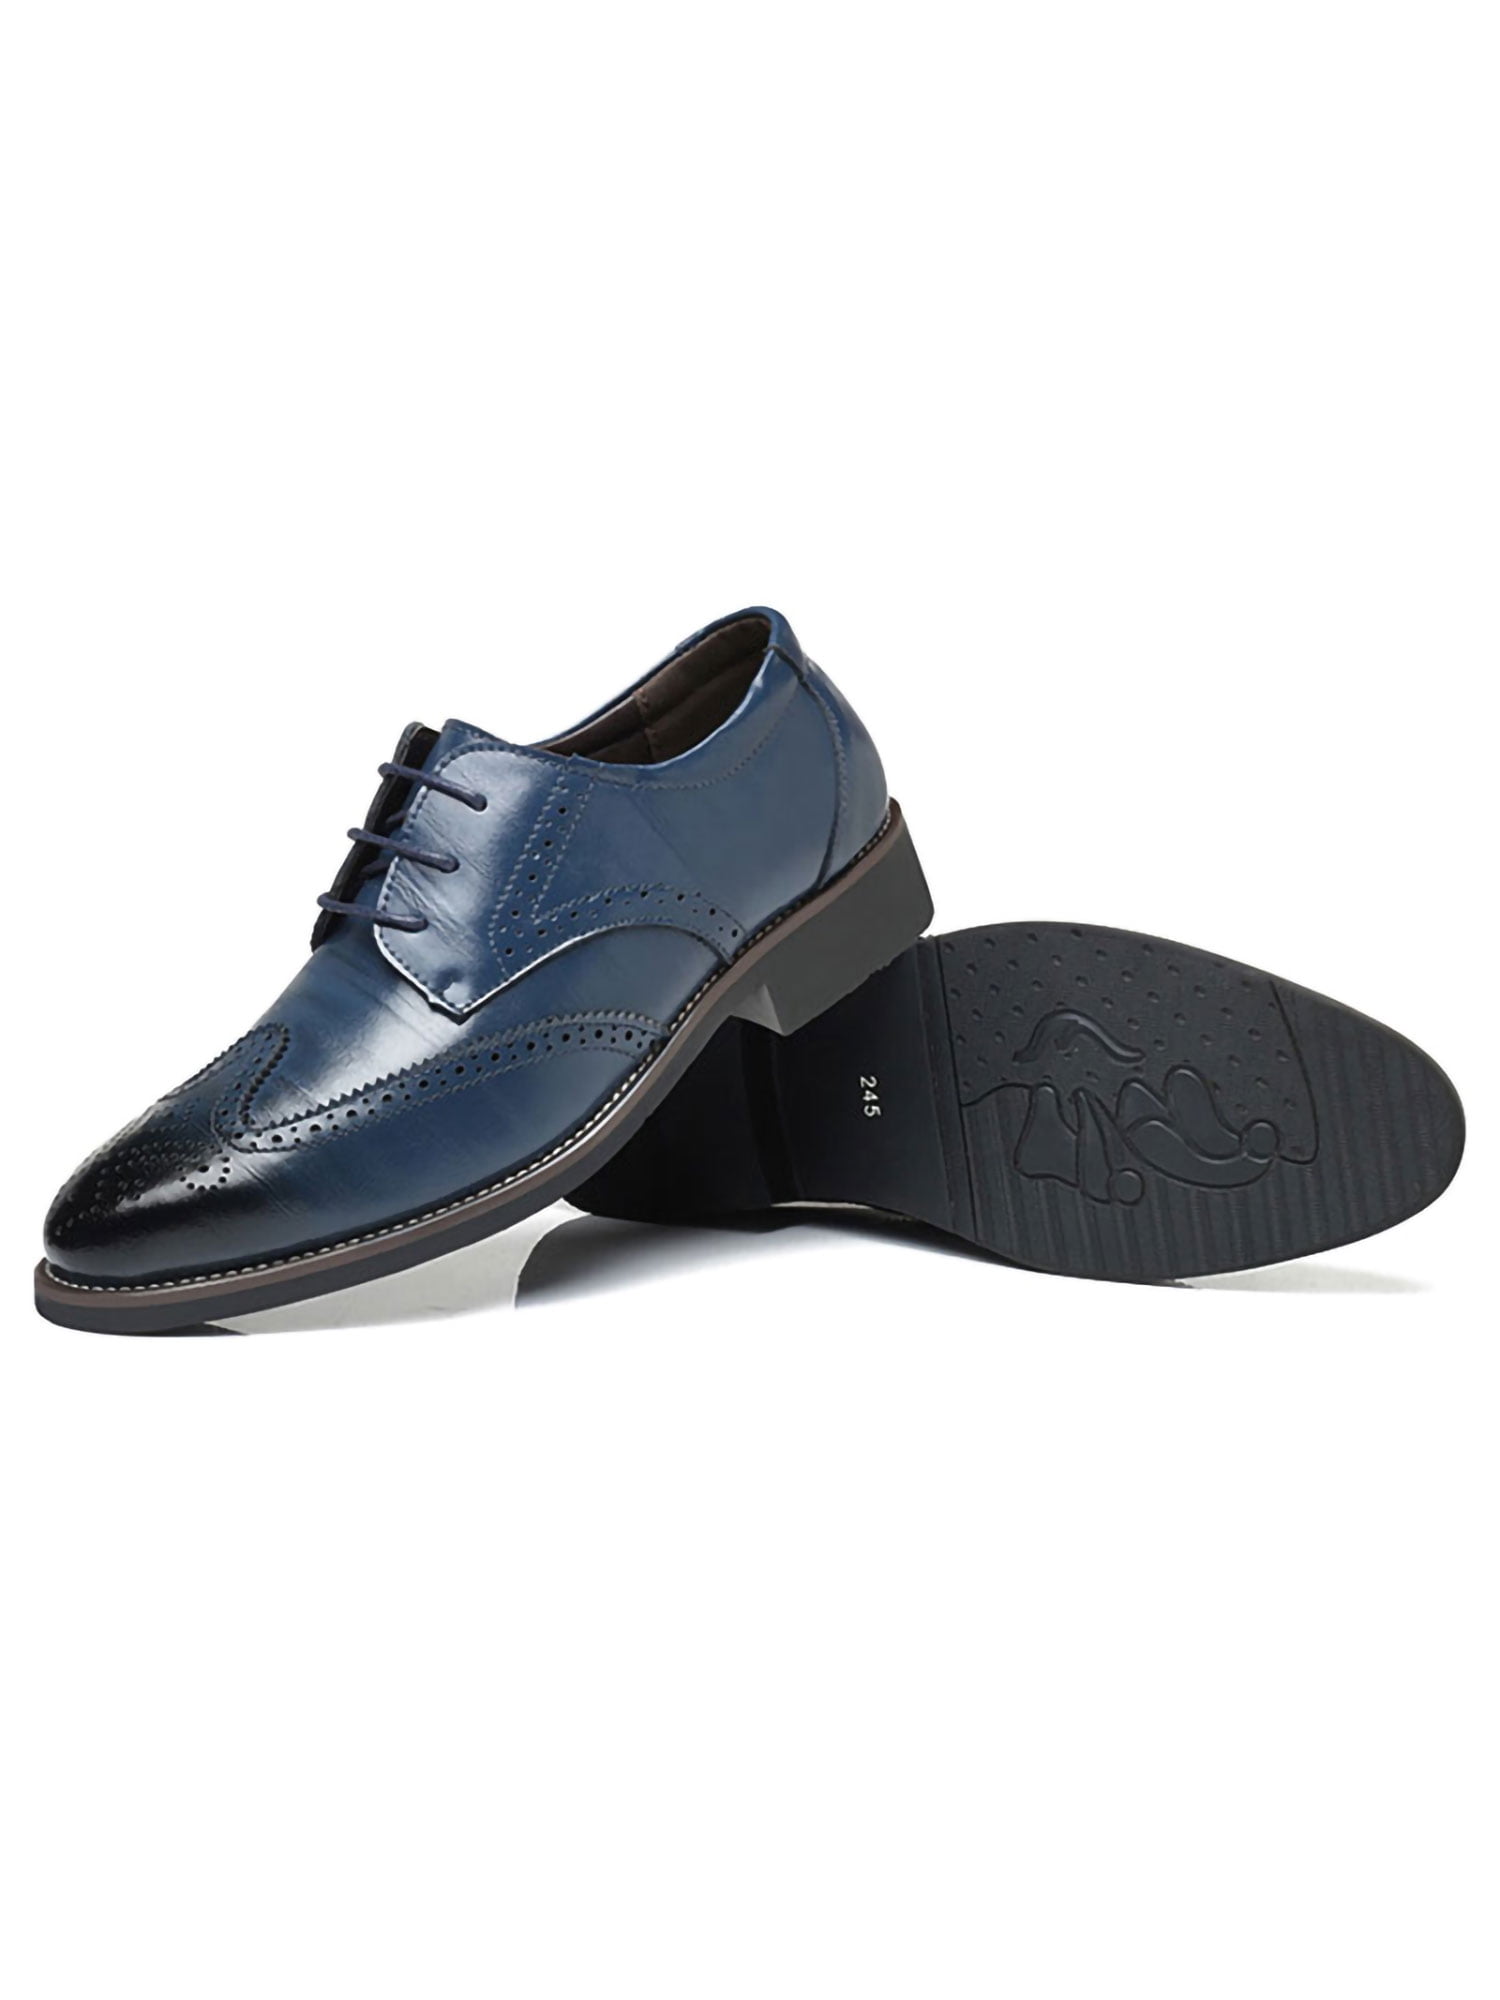 Details about   New Mens Faux Leather Lace Up Casual Shoes Office Business Formal Dress Non-slip